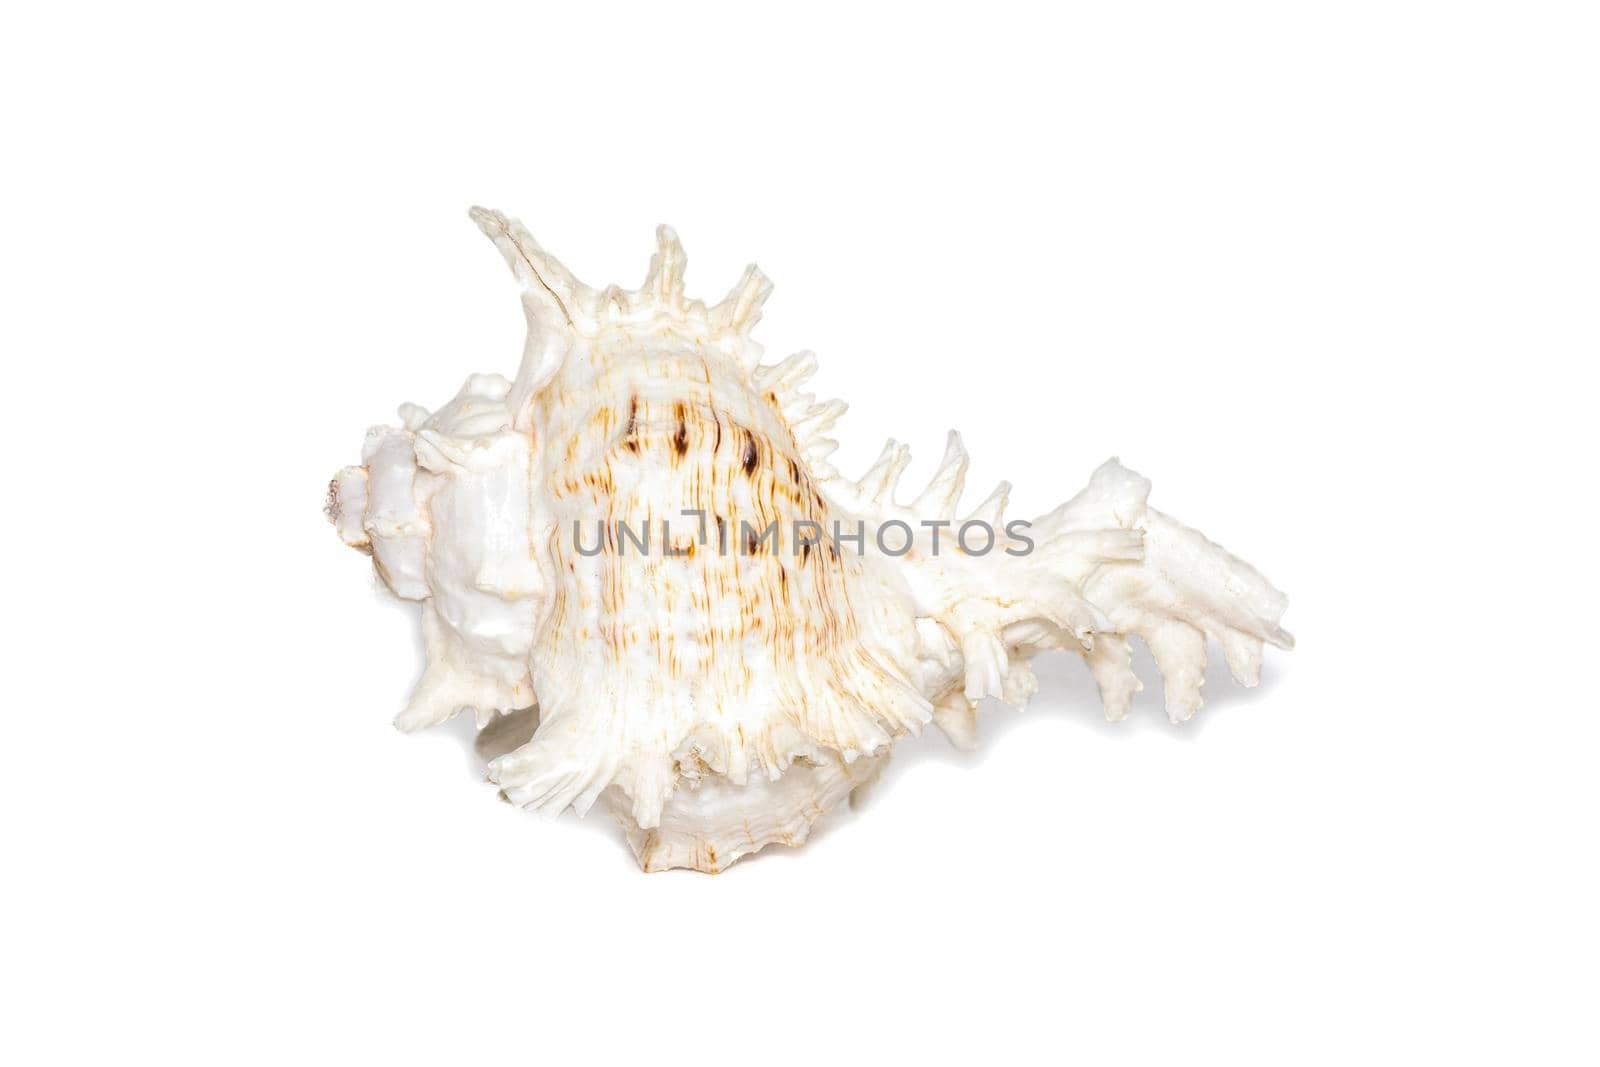 Image of natural large conch shell kirin snail thousands on a white background. Undersea Animals. Sea shells.